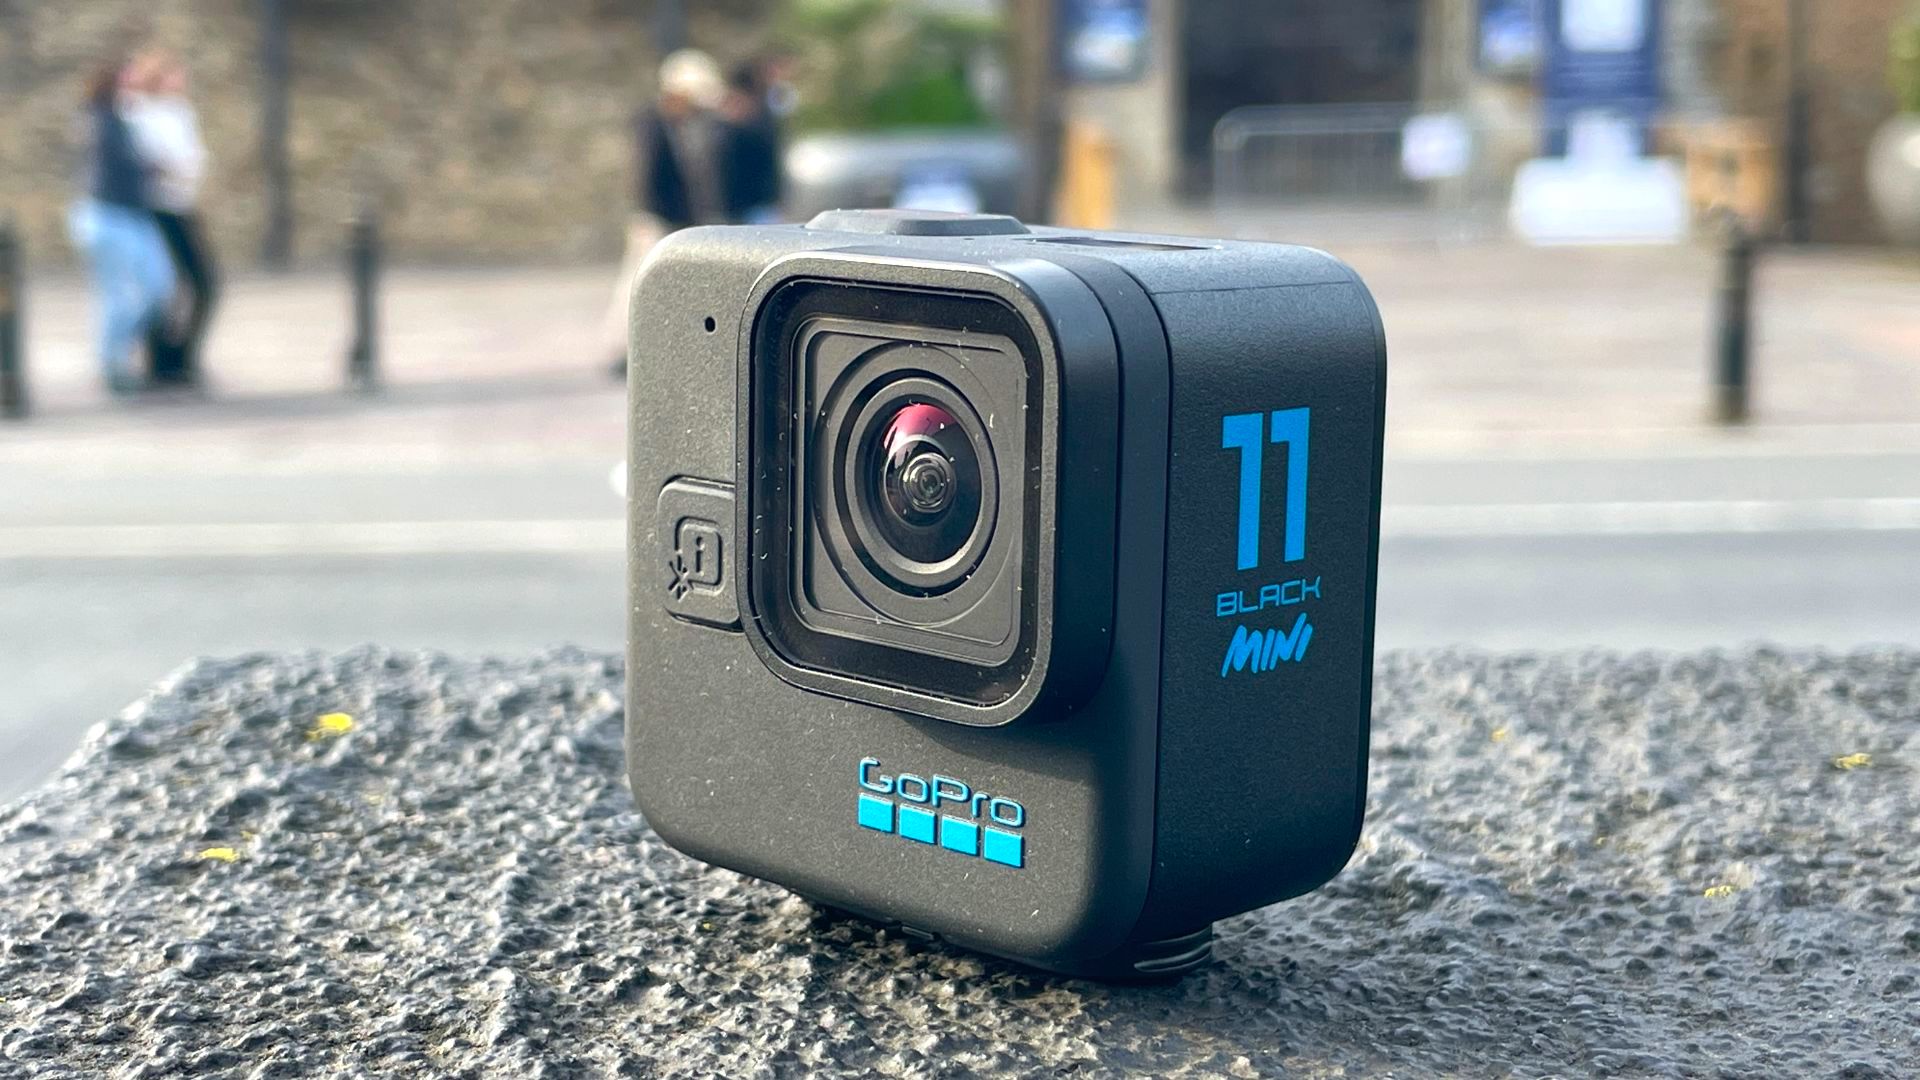 The GoPro Hero 11 Black Mini is 50 percent off right now